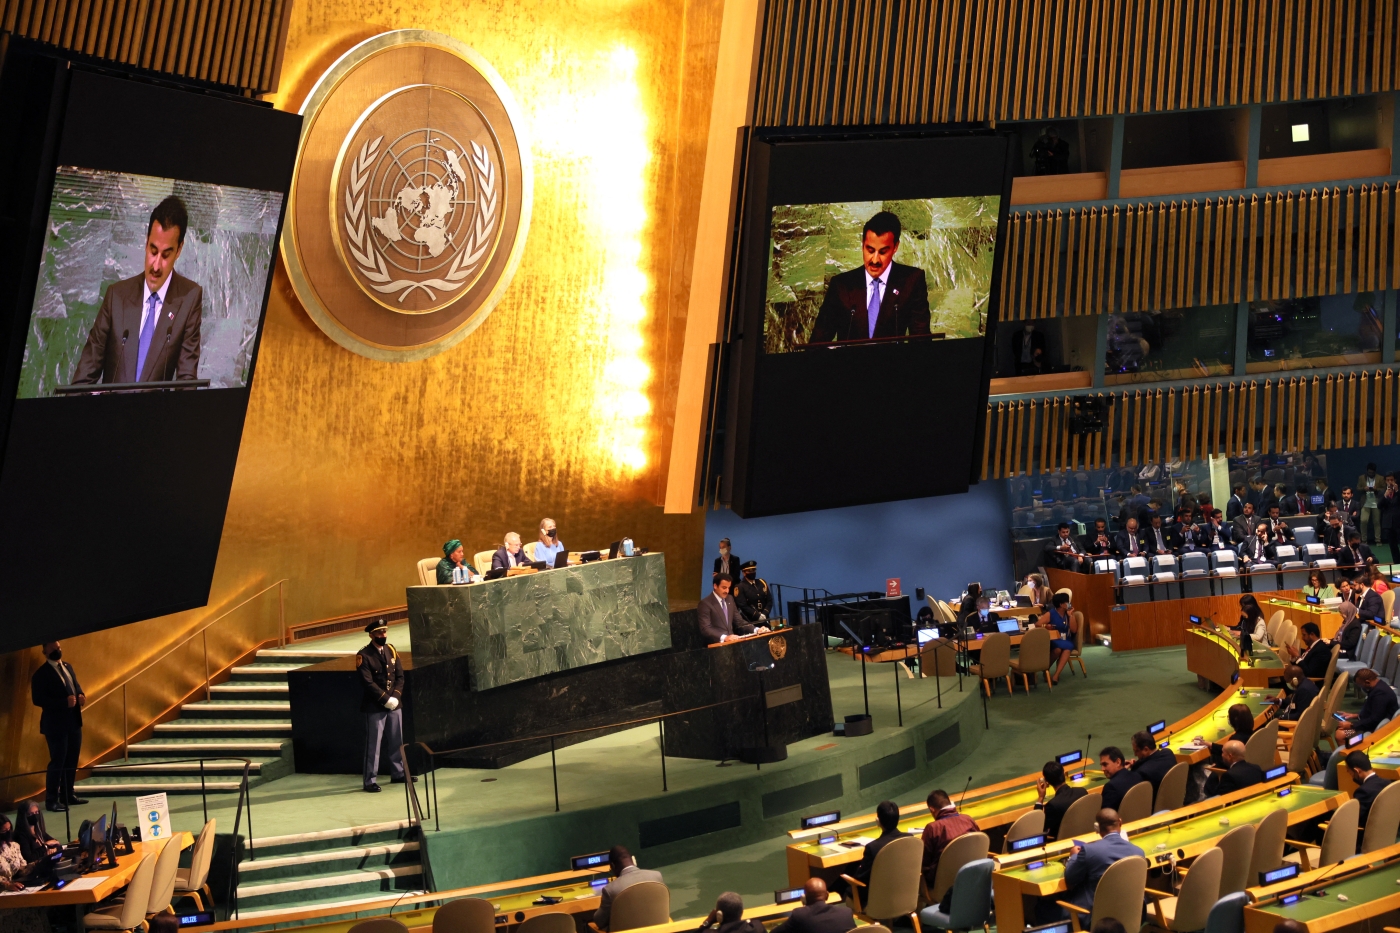 Emir of Qatar Sheikh Tamim bin Hamad Al-Thani speaks at the 77th session of the United Nations General Assembly (UNGA) at U.N. headquarters on September 20, 2022 in New York City (AFP)